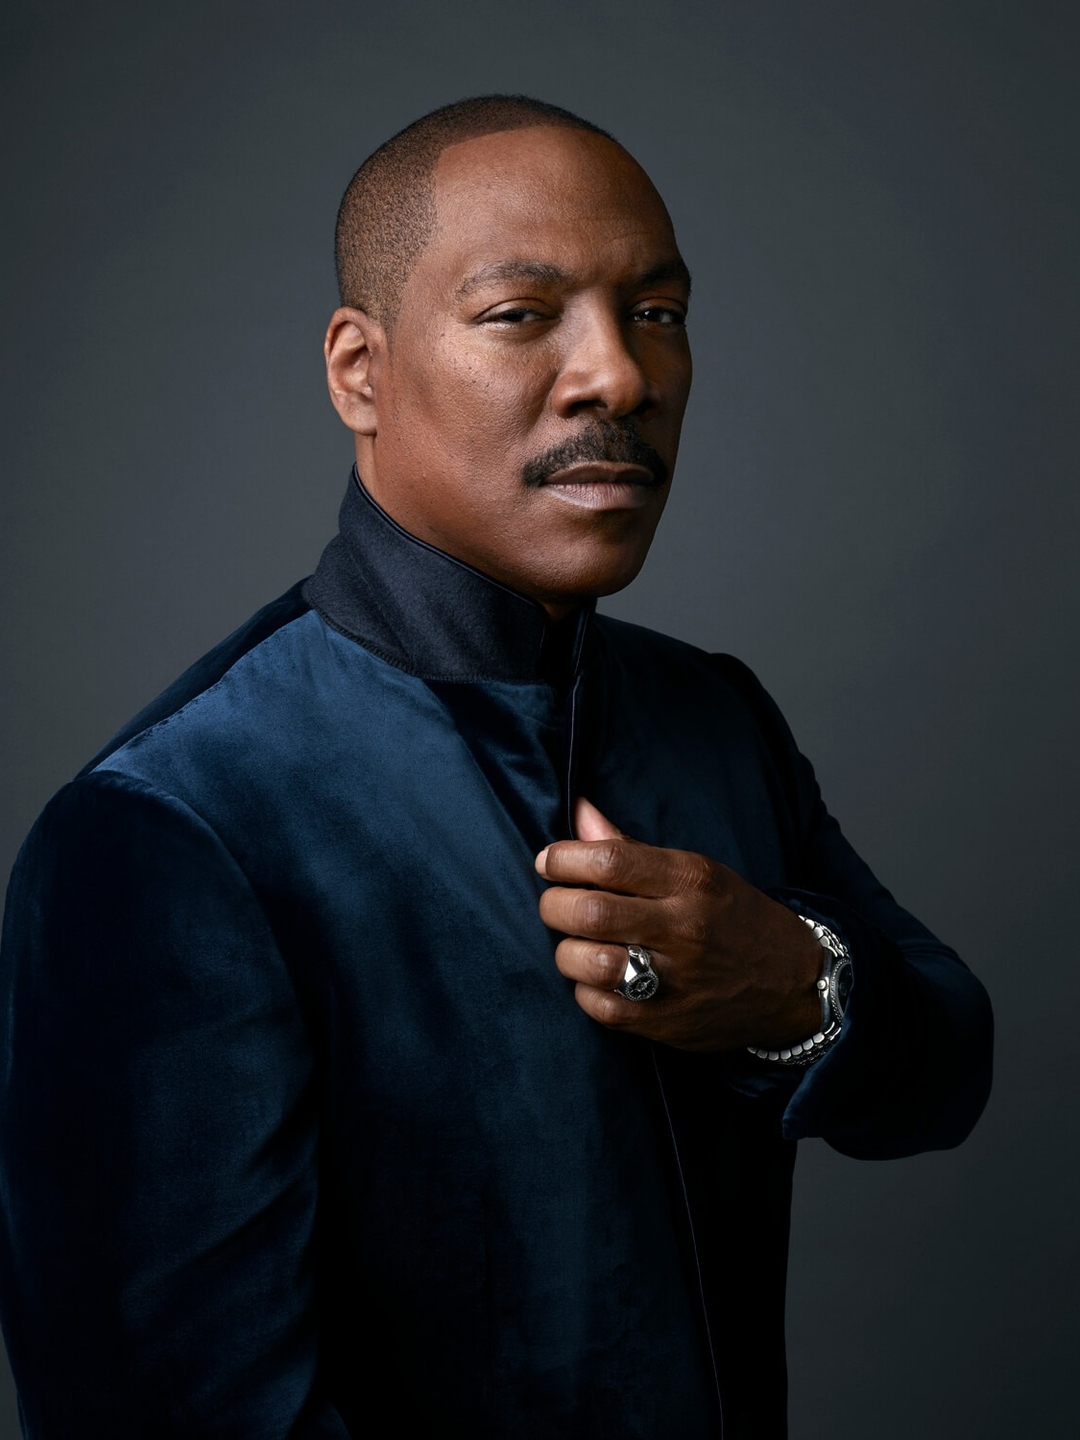 Eddie Murphy who is his father